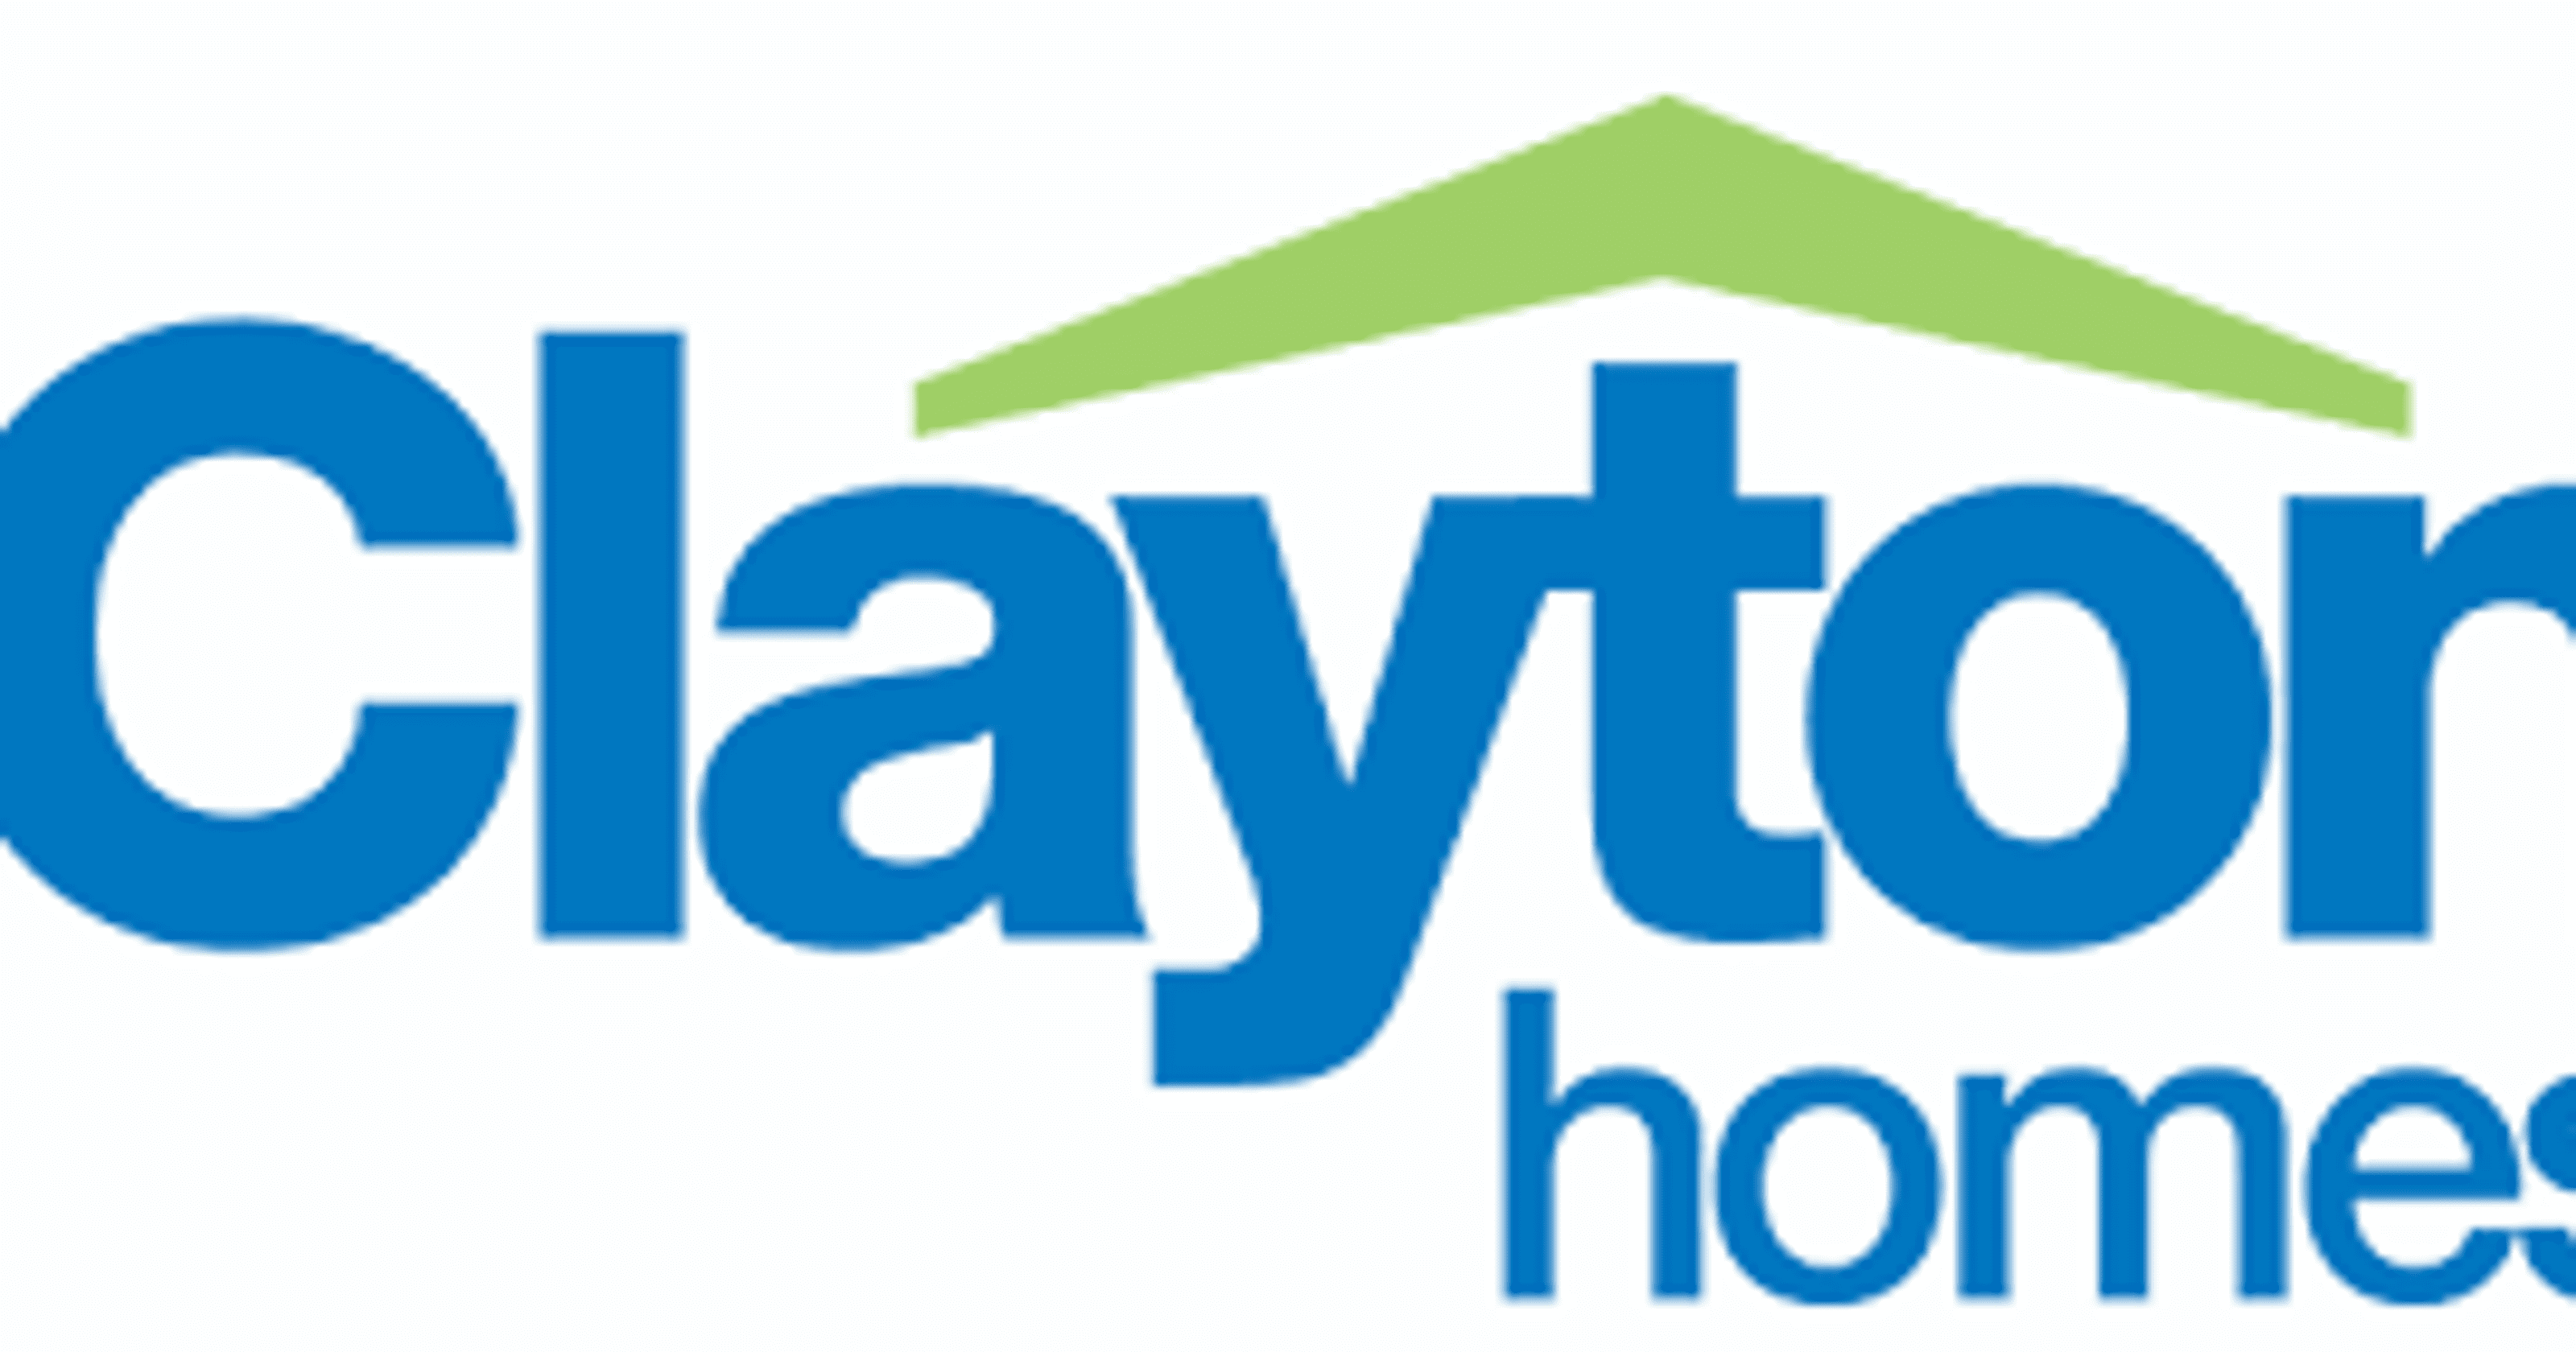 Mobile Home Logo - Clayton Homes acquires Doyle Mobile Homes